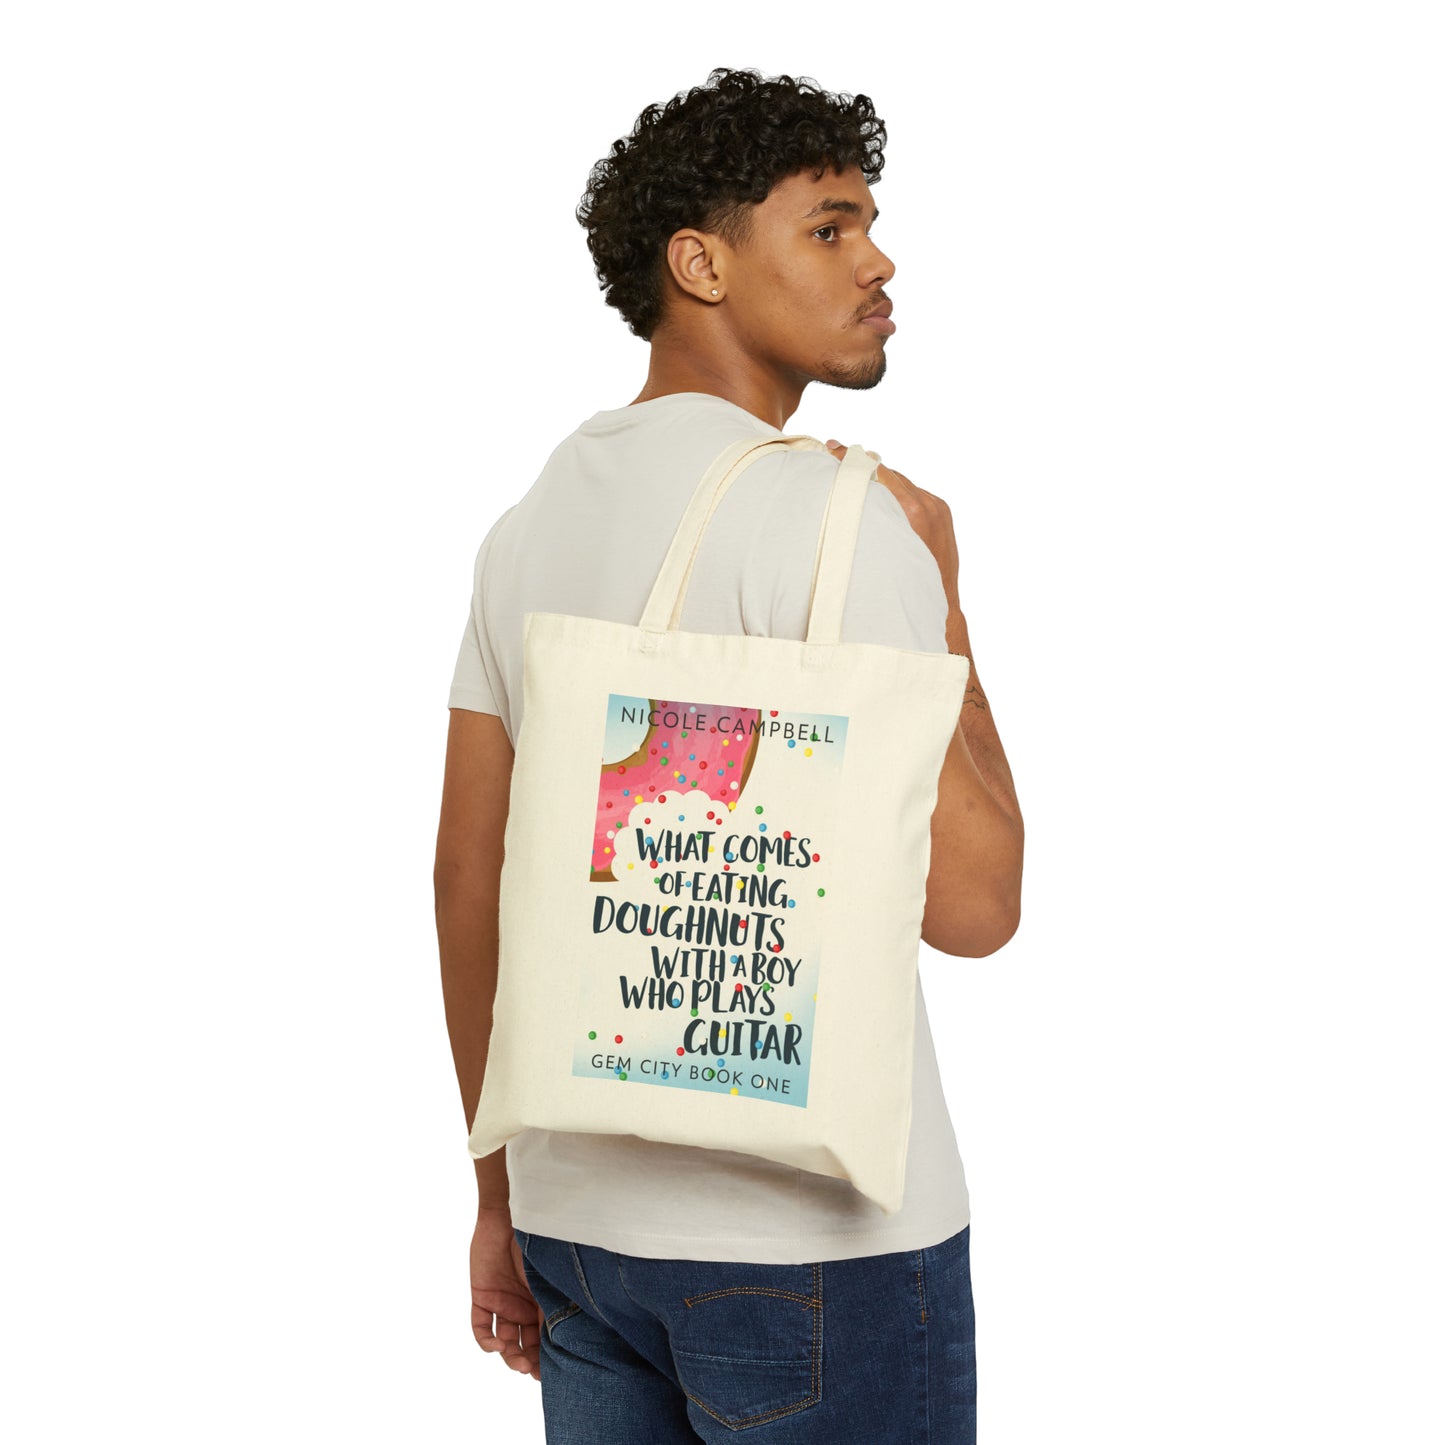 What Comes of Eating Doughnuts With a Boy Who Plays Guitar - Cotton Canvas Tote Bag